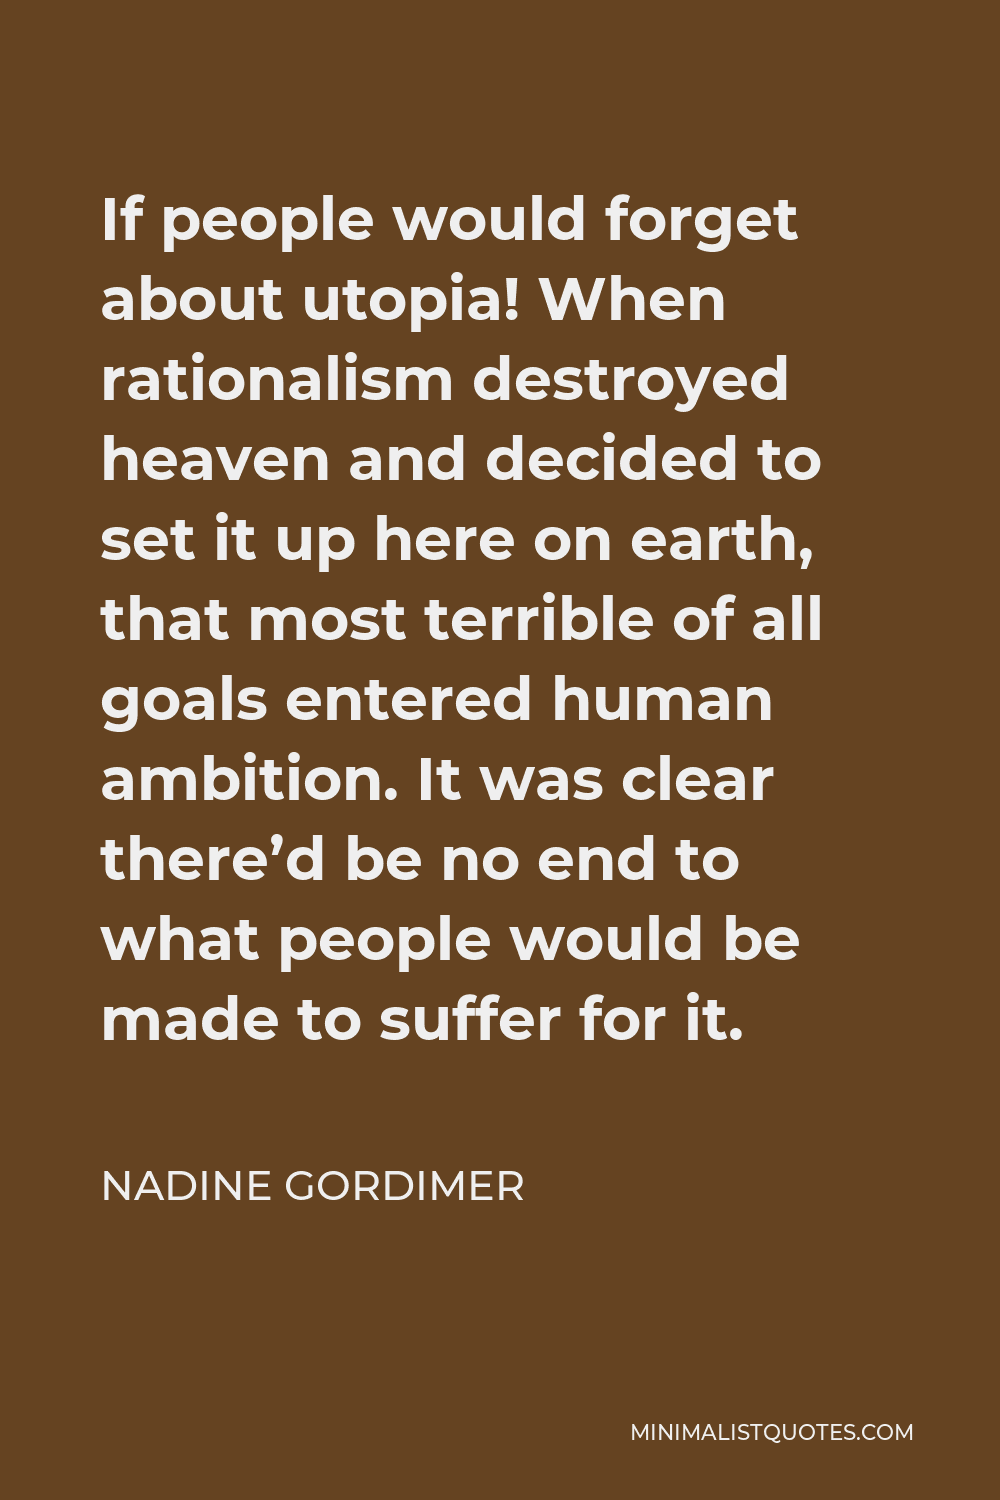 Nadine Gordimer Quote - If people would forget about utopia! When rationalism destroyed heaven and decided to set it up here on earth, that most terrible of all goals entered human ambition. It was clear there’d be no end to what people would be made to suffer for it.